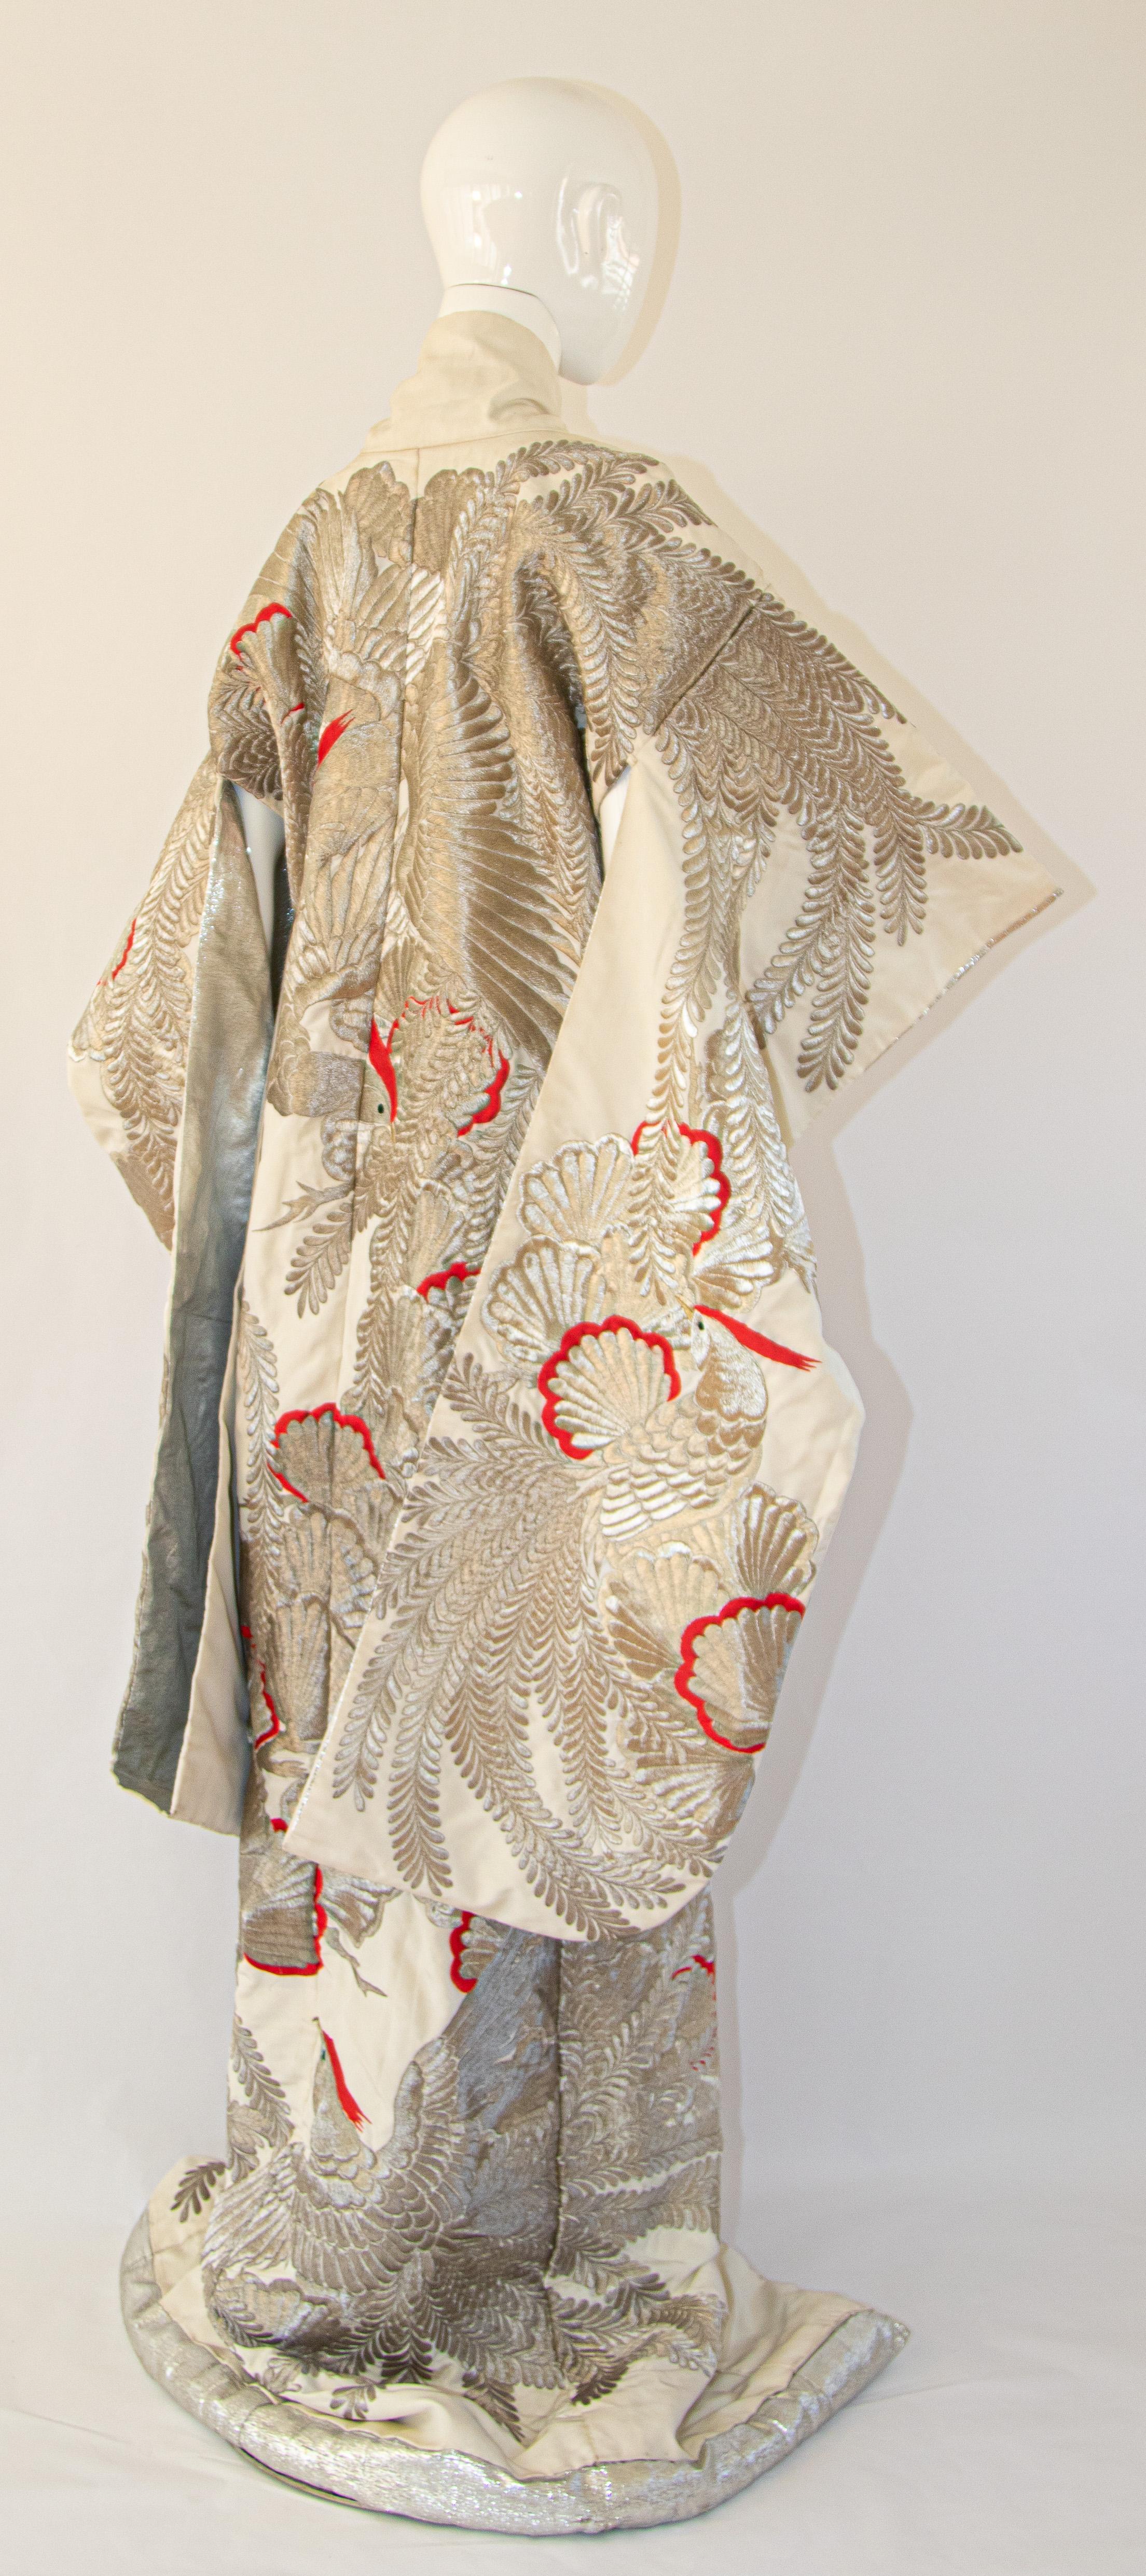 A vintage midcentury ivory and silver thread silk brocade collectable Japanese ceremonial wedding kimono.
One of a kind handcrafted fabulous museum quality ceremonial piece in pure silk with intricate detailed hand-embroidery throughout accented